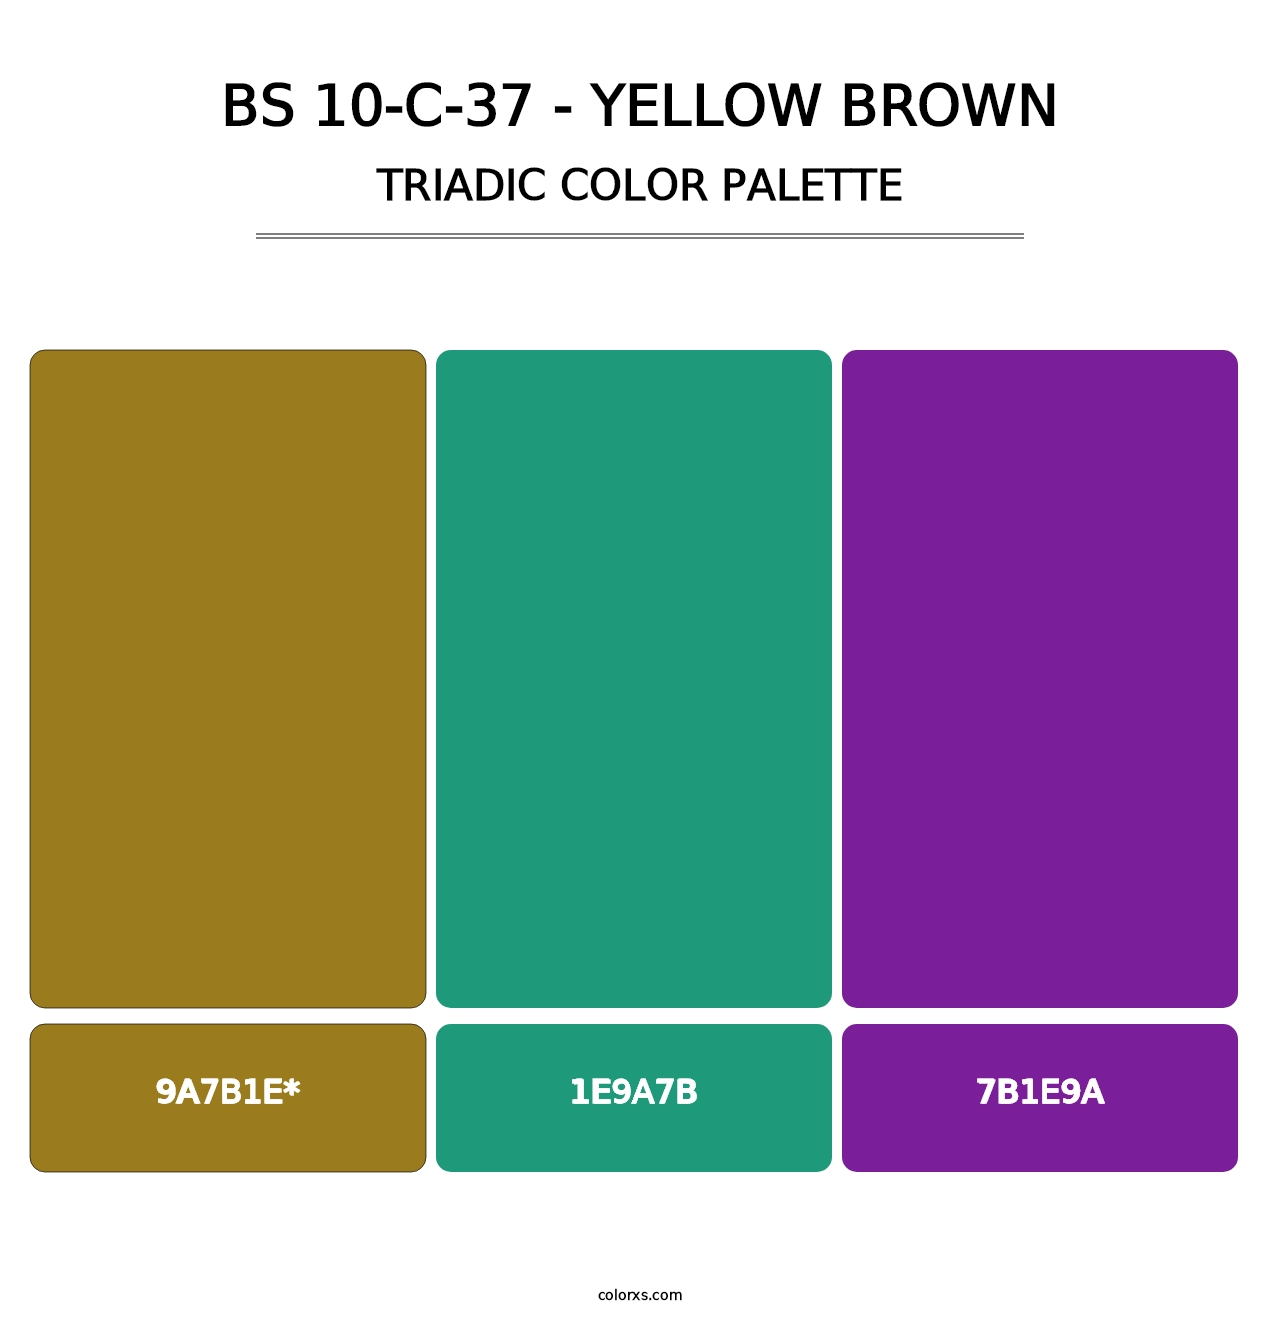 BS 10-C-37 - Yellow Brown - Triadic Color Palette